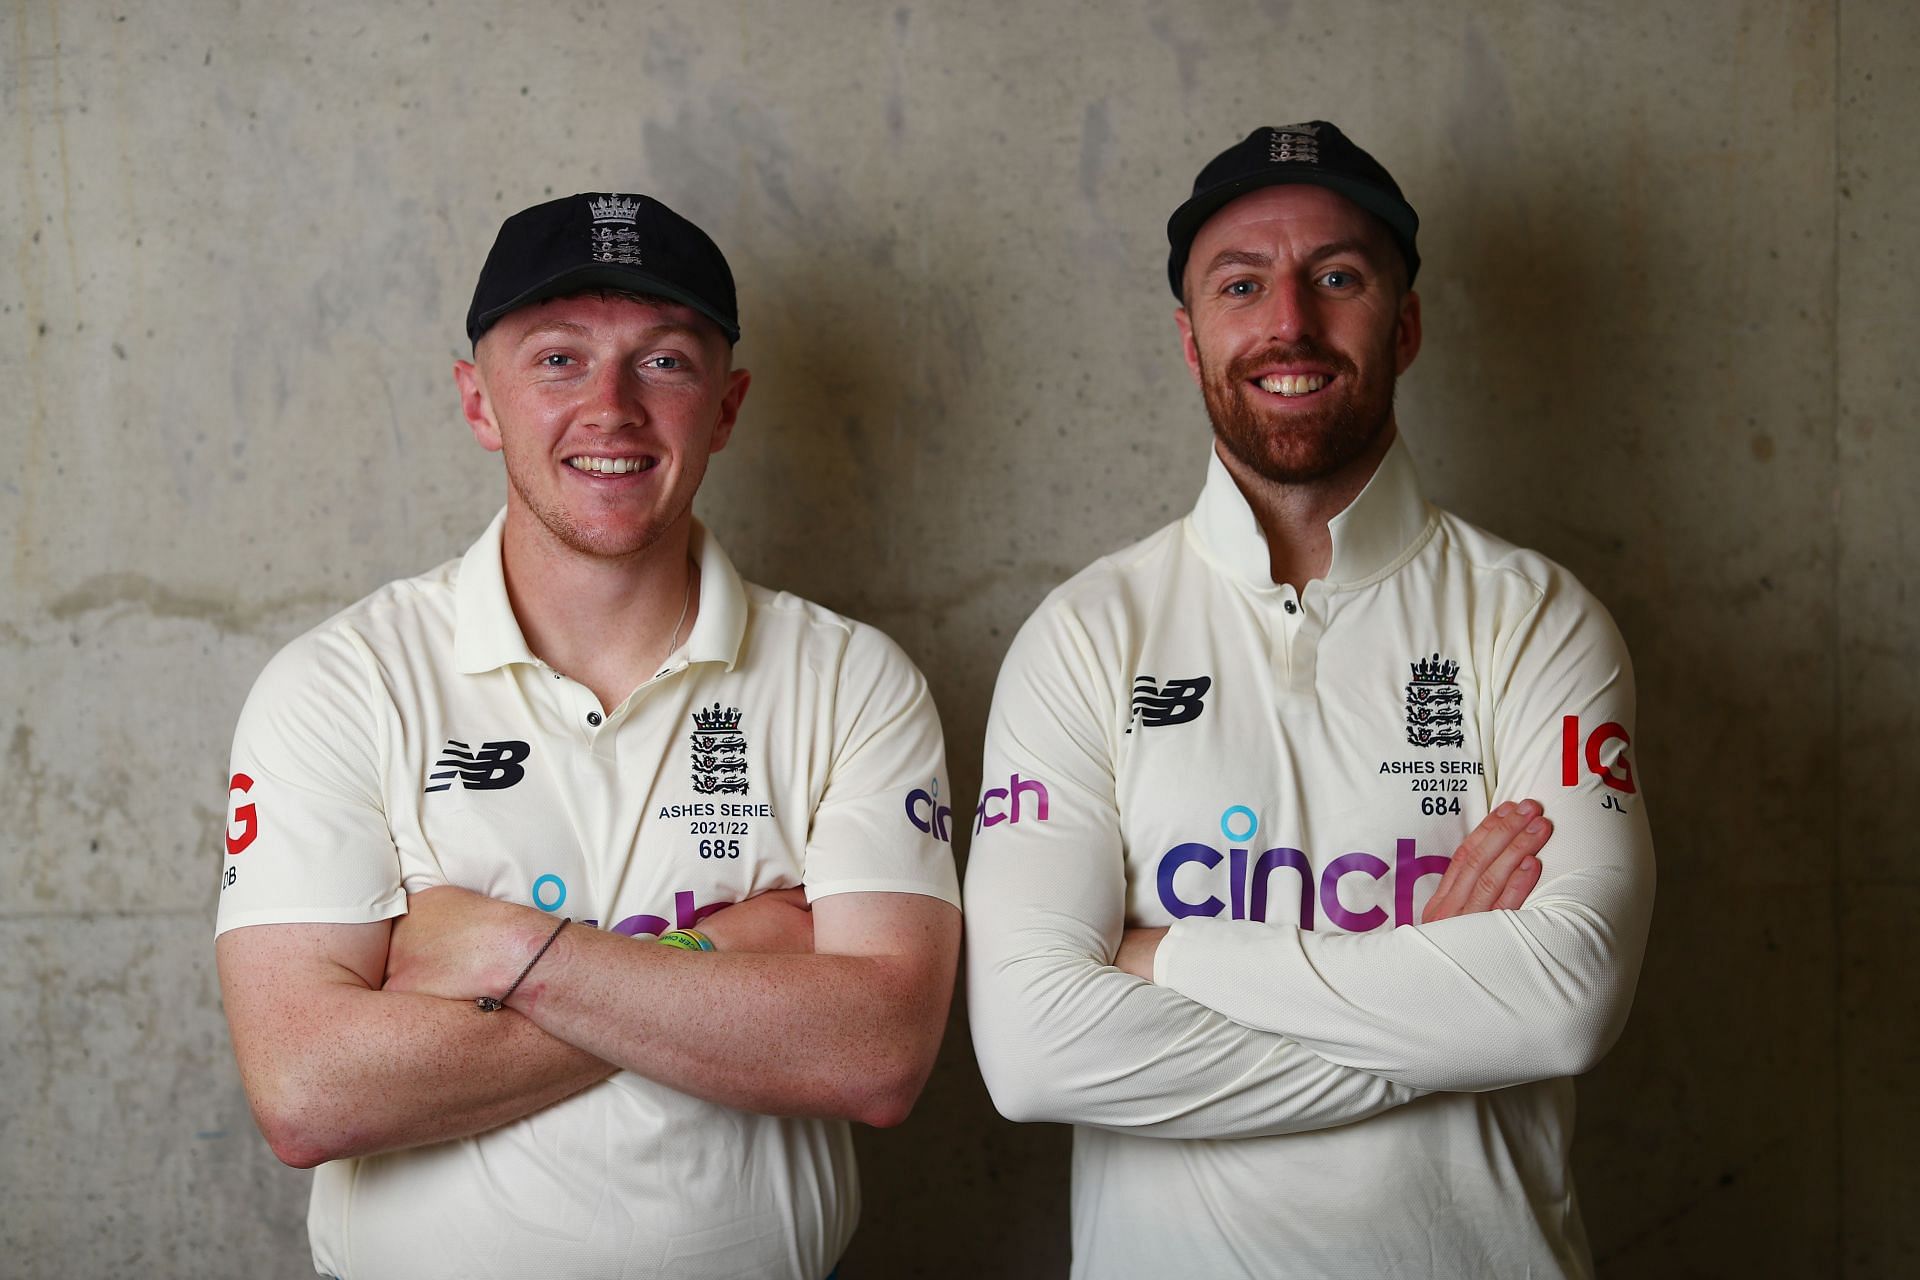 Jack Leach and Dom Bess have a point to prove to feature regularly in the England Test side.